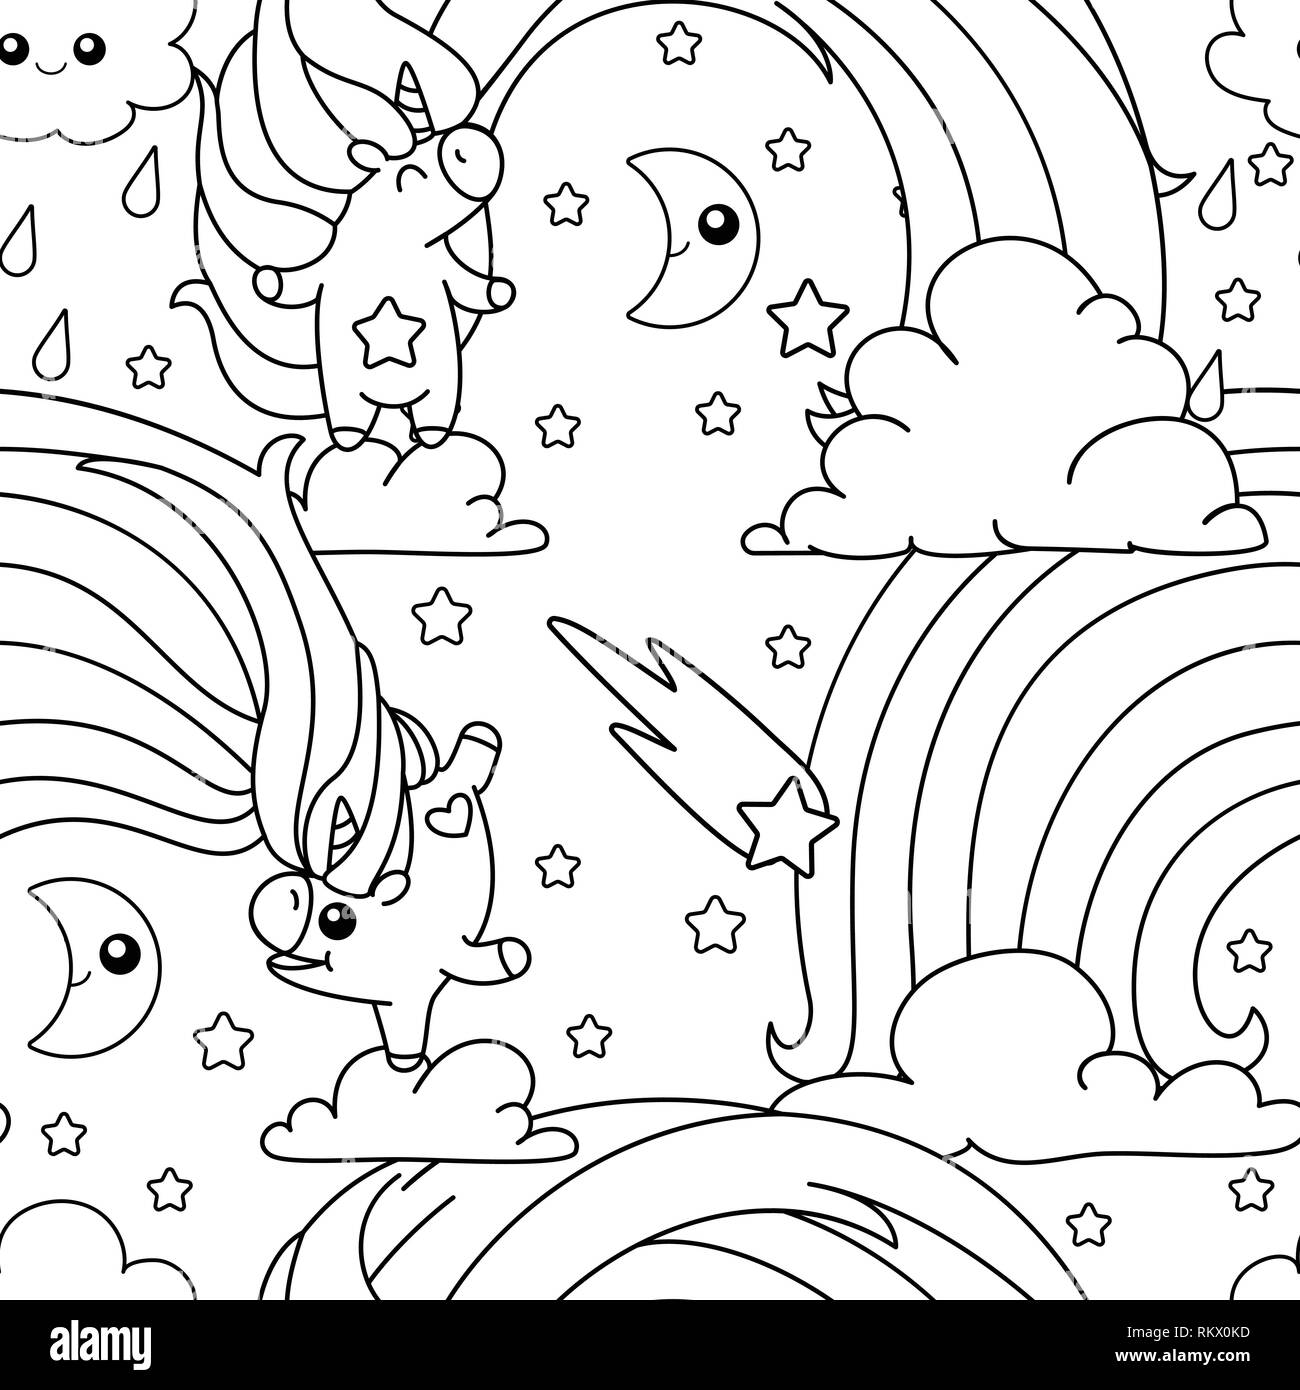 vector rainbow unicorn pattern coloring book page Stock Vector